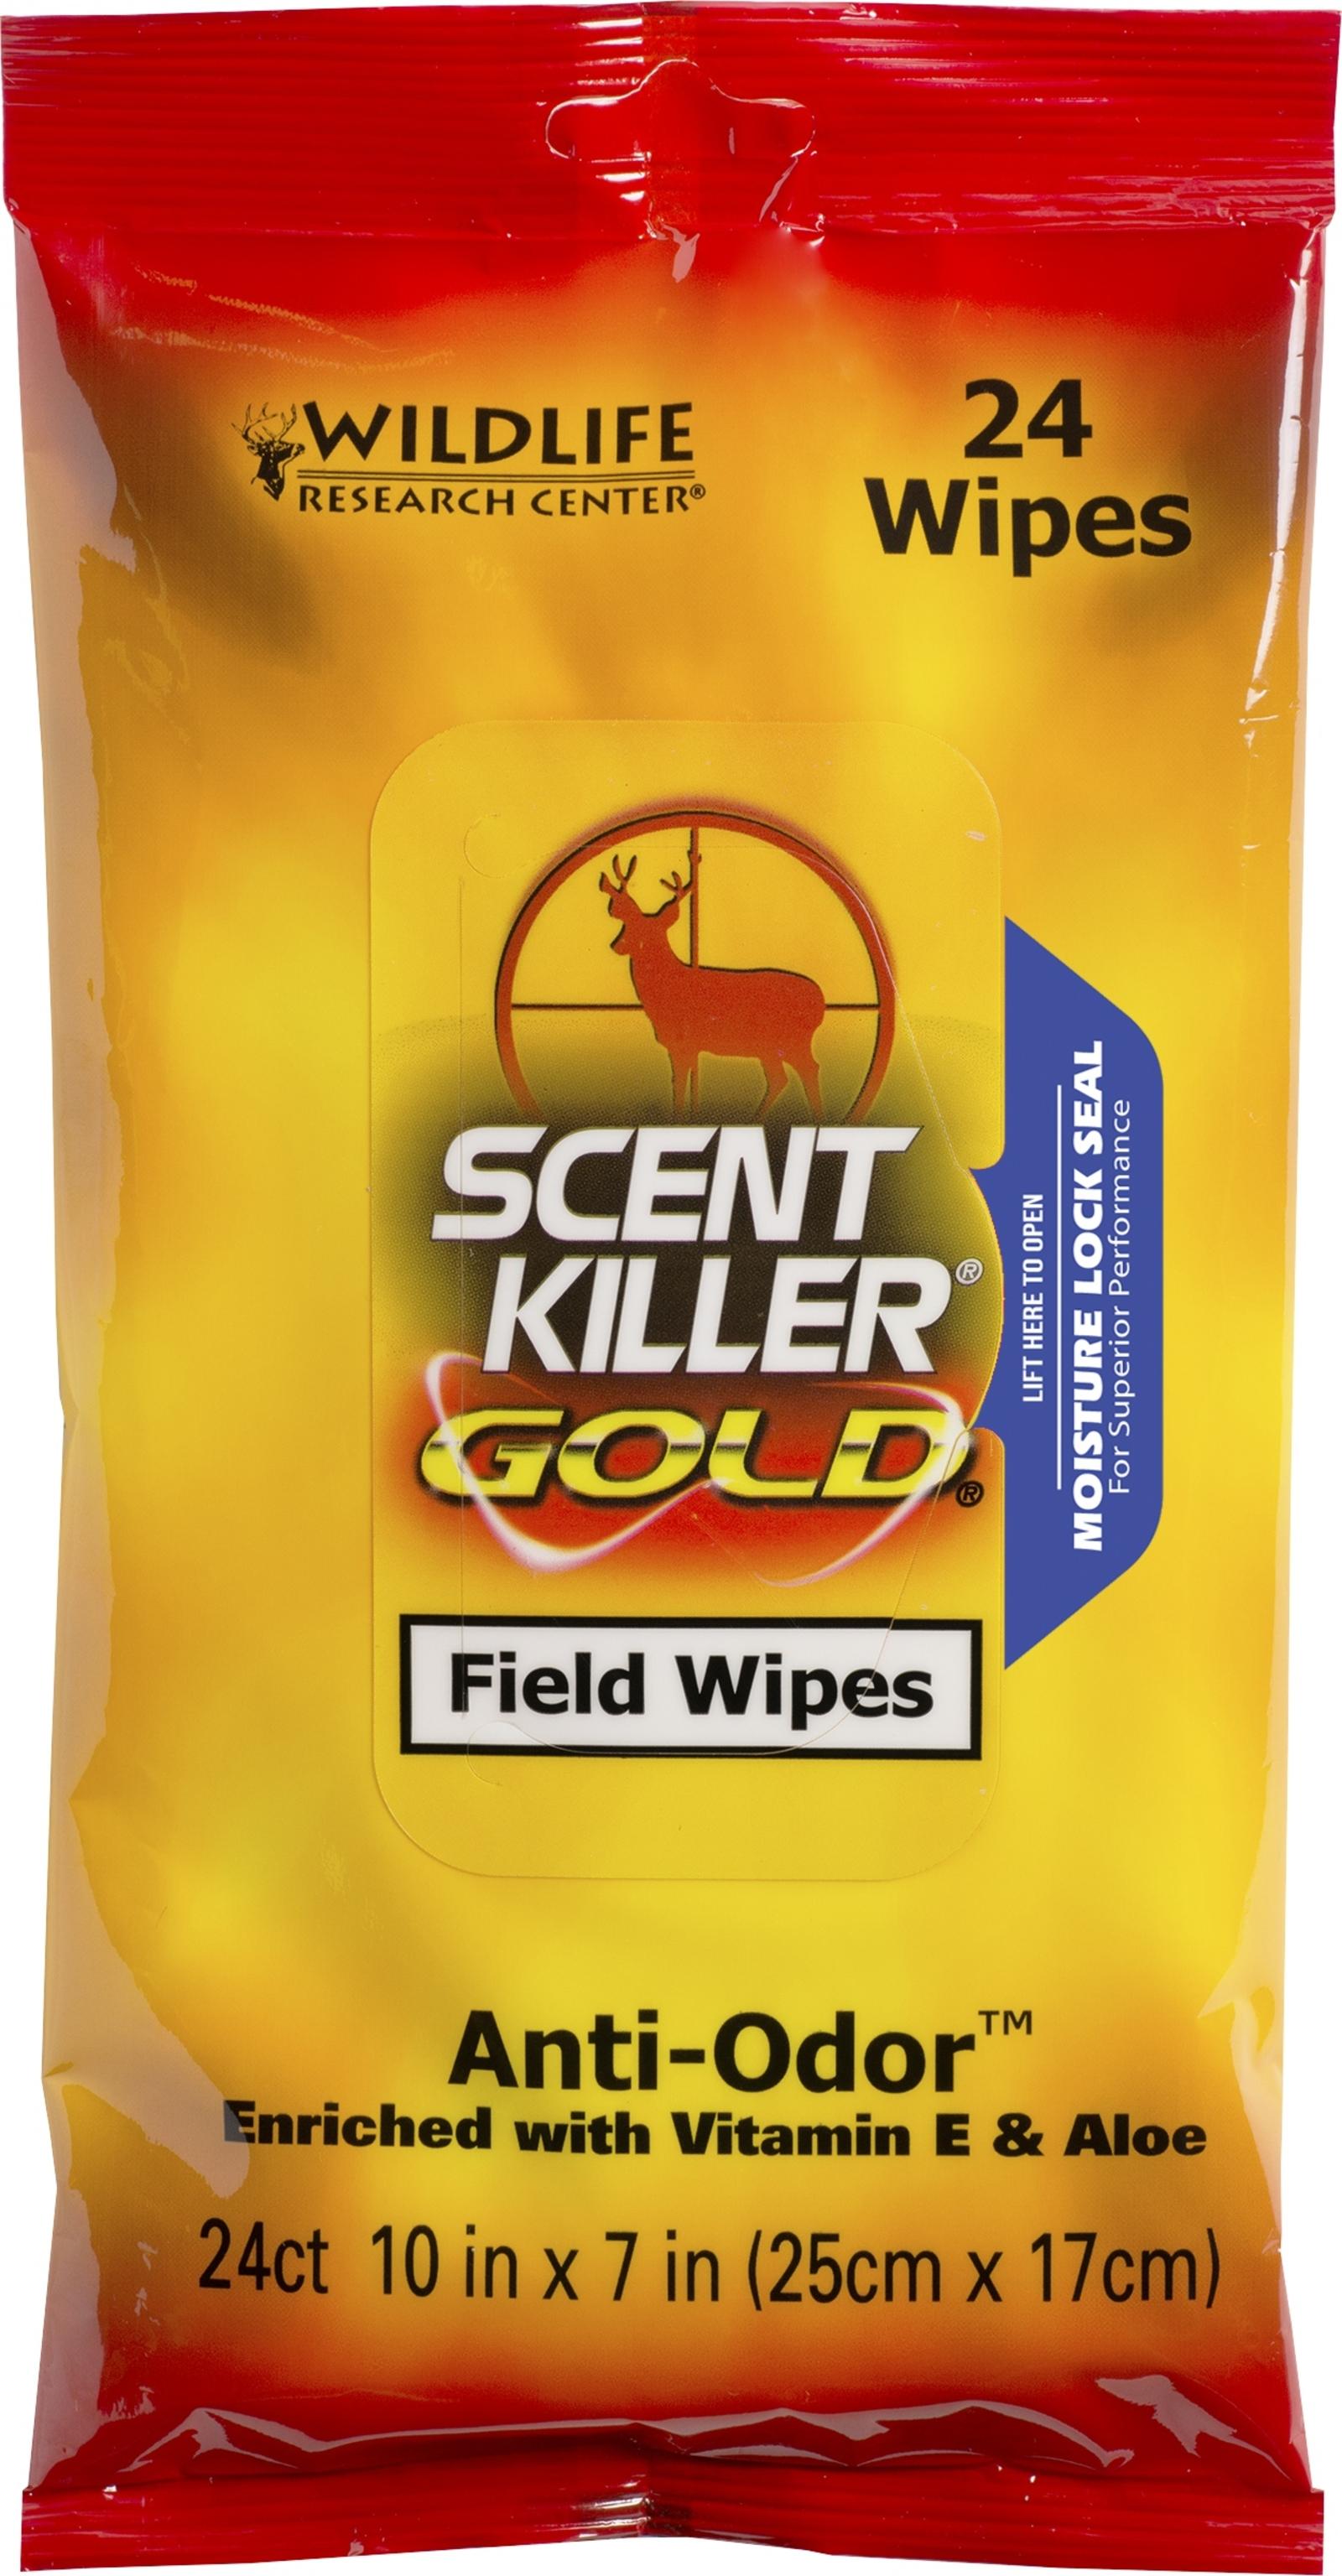 Wildlife Research Center Scent Killer® Gold® Field Wipes